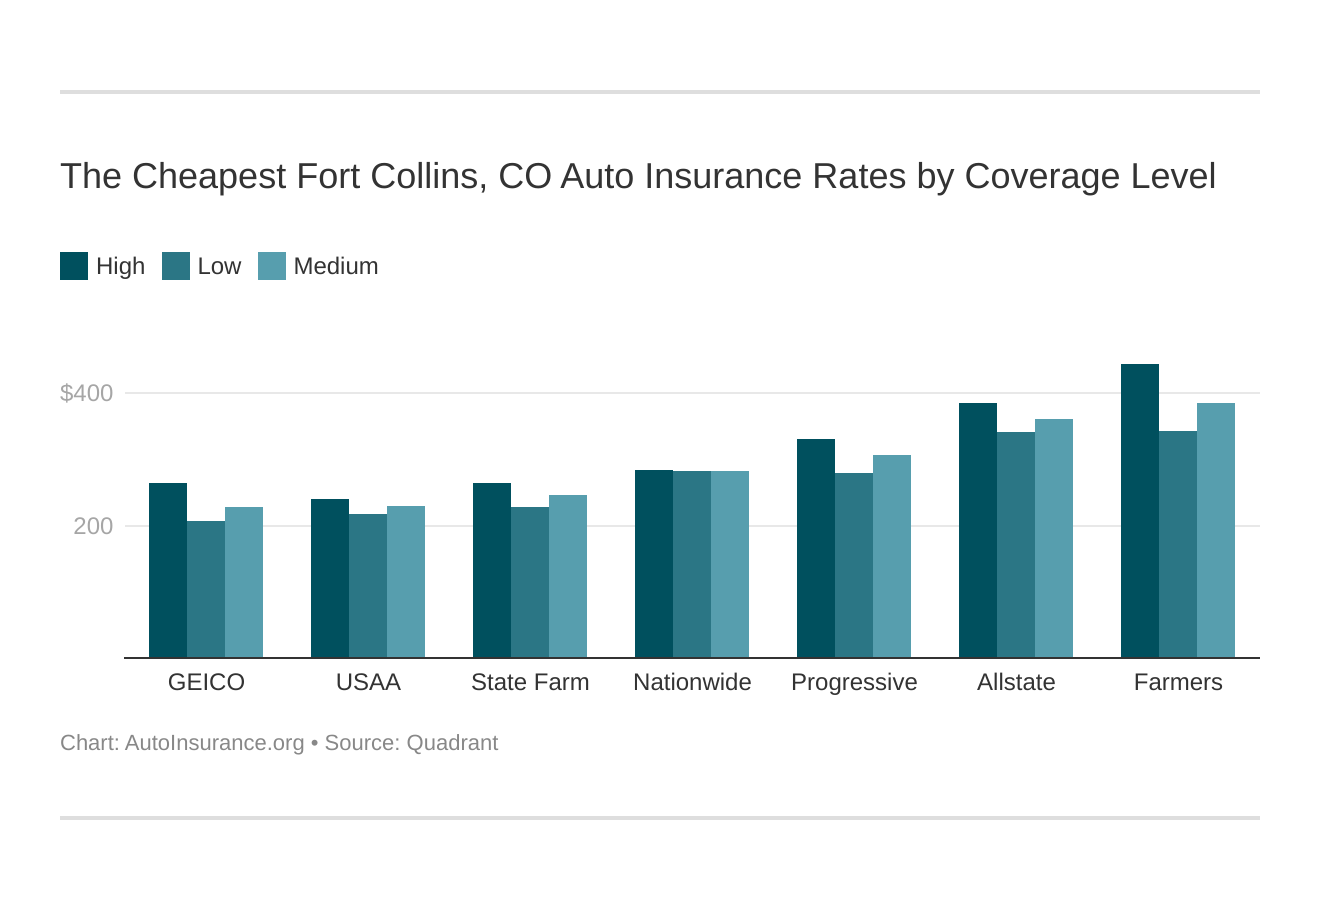 The Cheapest Fort Collins, CO Auto Insurance Rates by Coverage Level